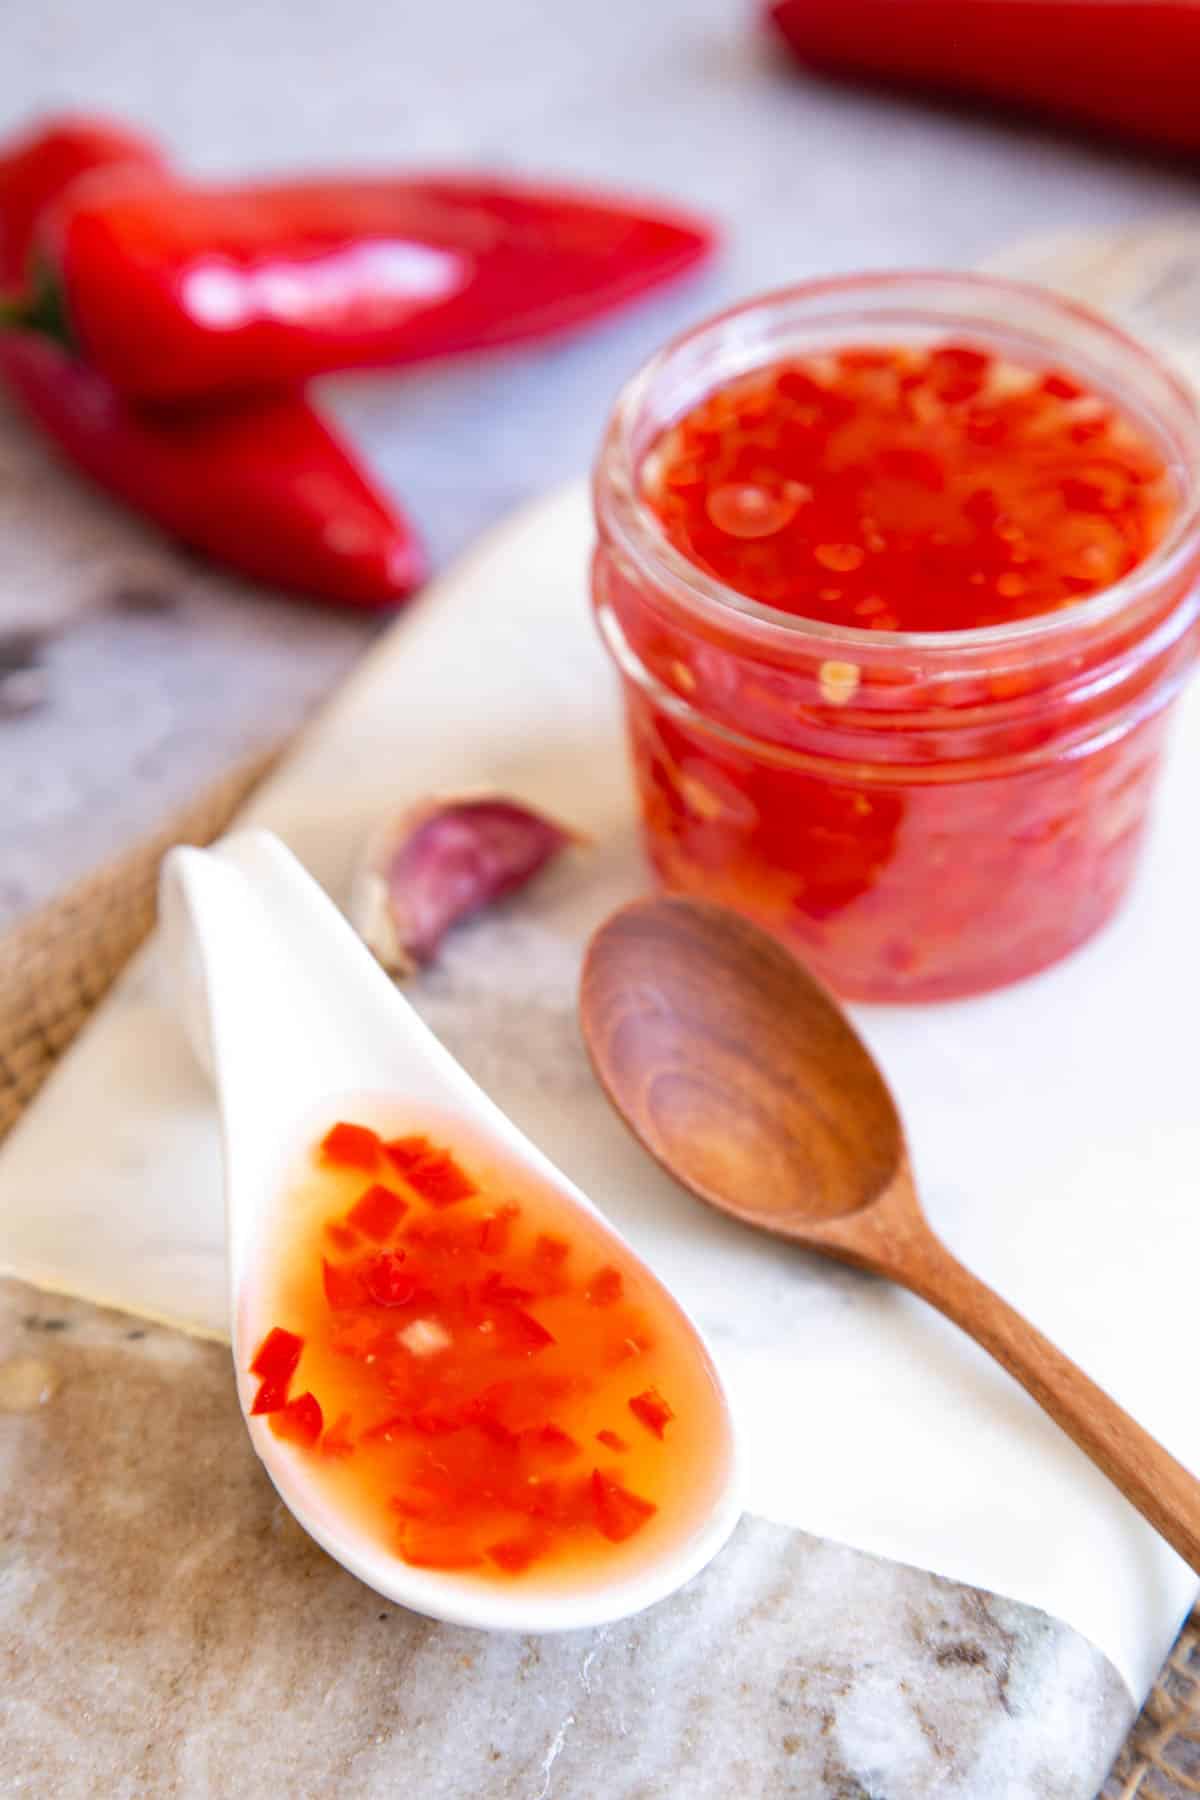 A jar of sweet chilli sauce with a wooden spoon, and an Asian style ceramic spoon full of the sauce. The warm red of the sauce contrasts with the cool white and grey marrble of the serving board on which it stands.